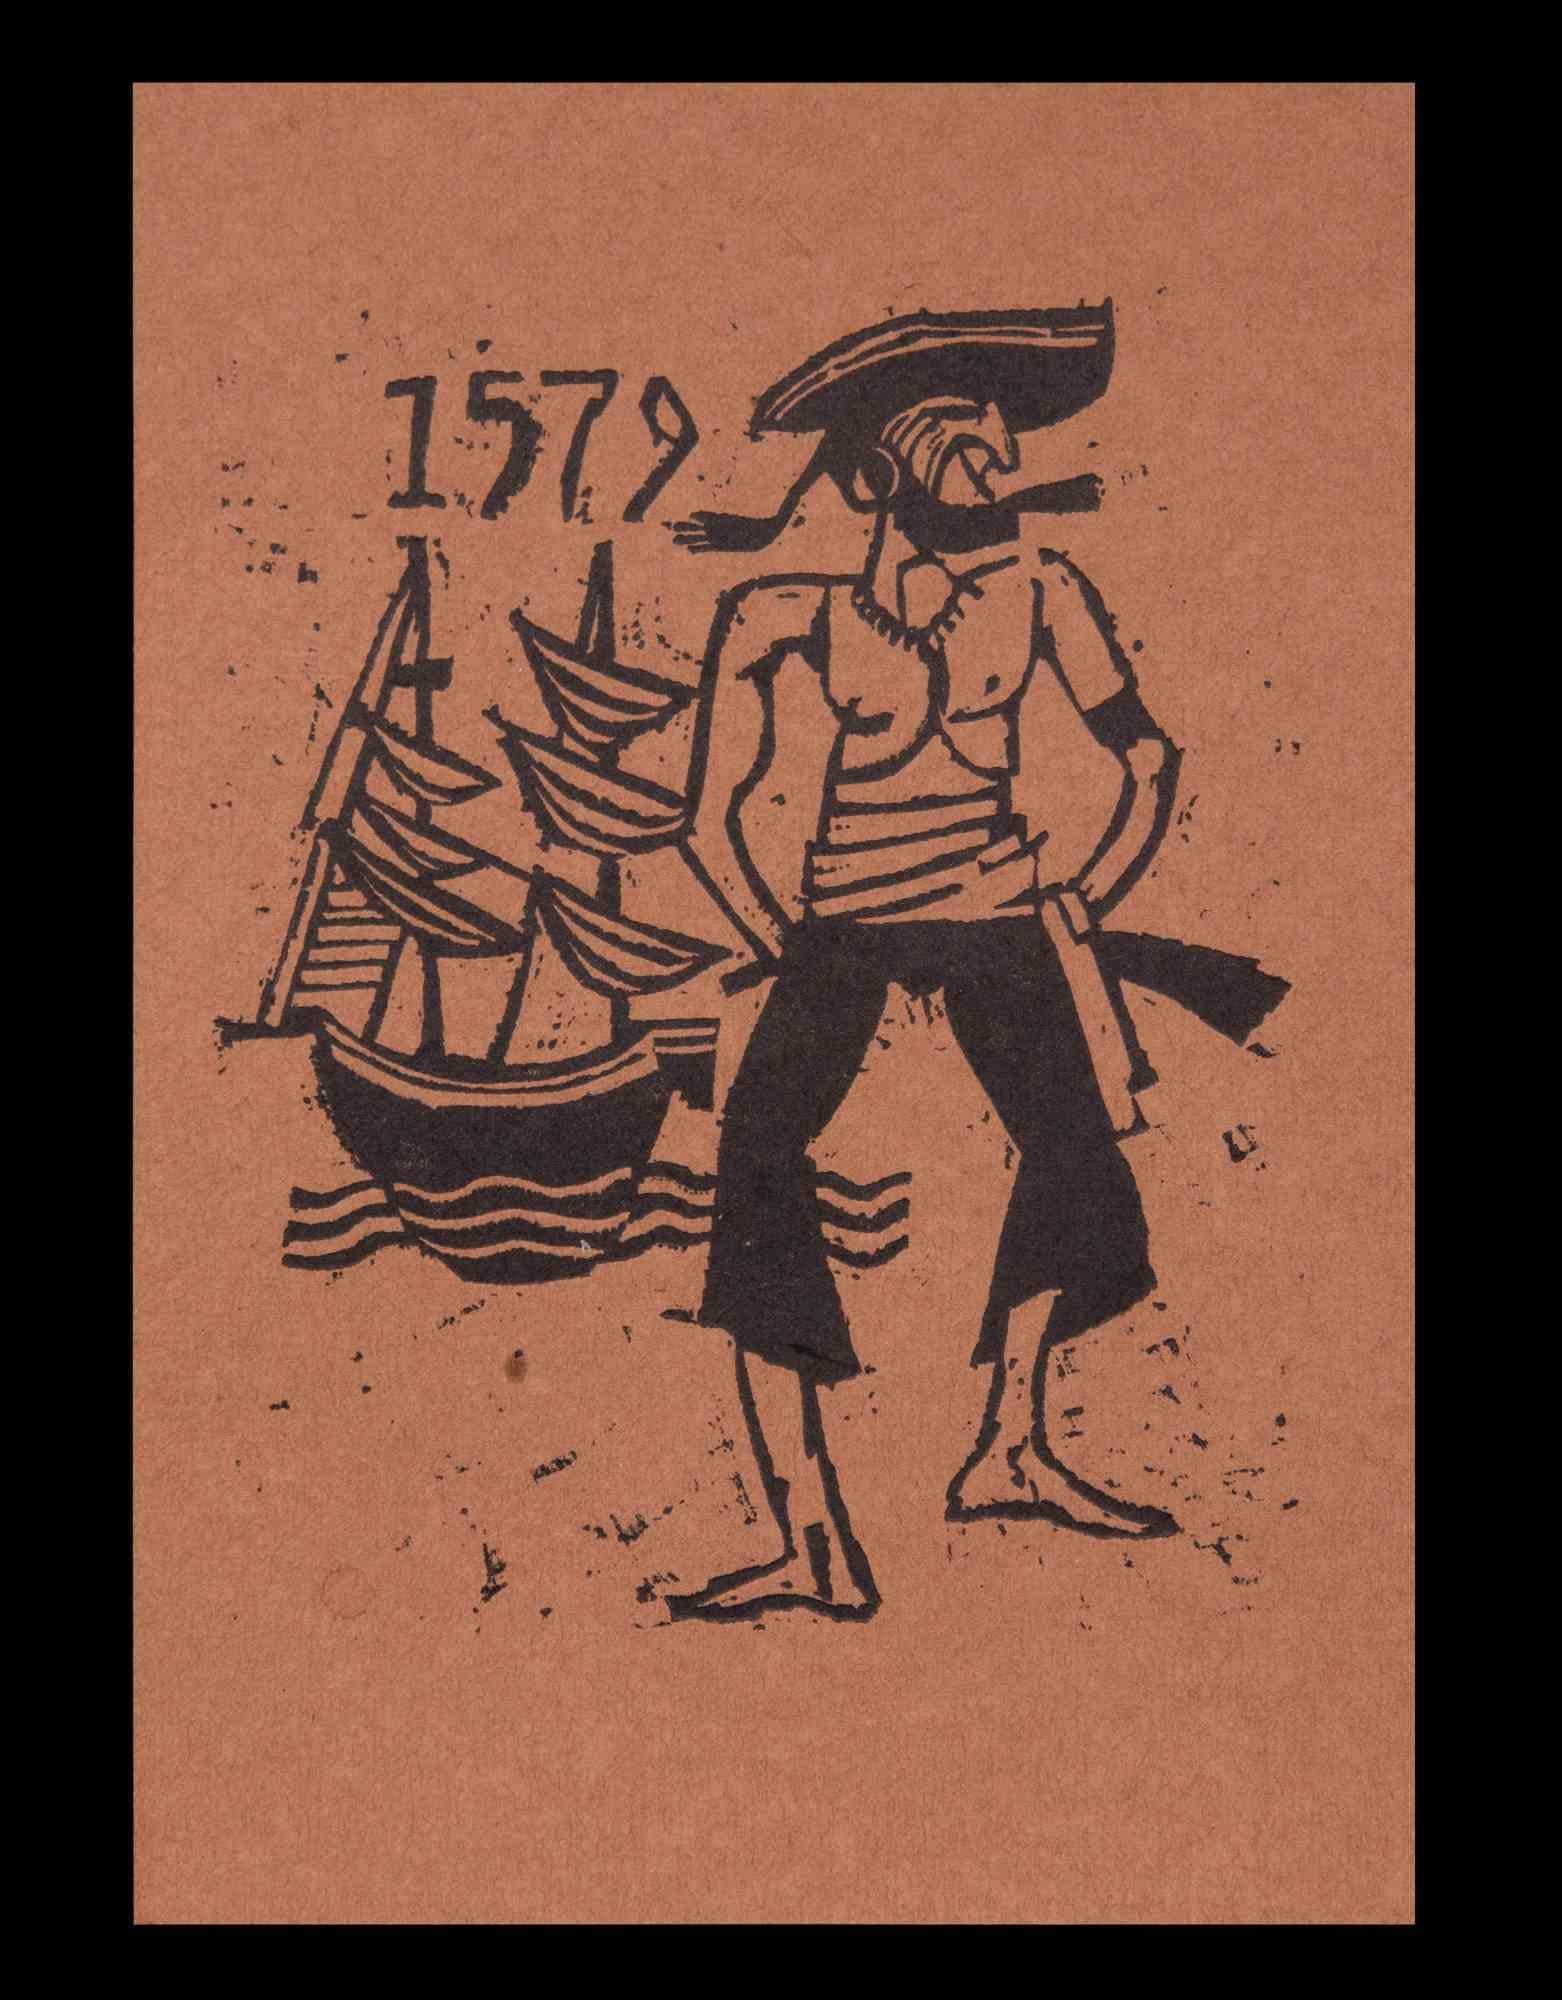 Sailor Man in 1579 is a woodcut print on brownish color paper print on paper realized by Charles Sterns in the early 20th century

Good conditions.

The artwork is represented by mastery through intense black color and deft strokes, full of emotion